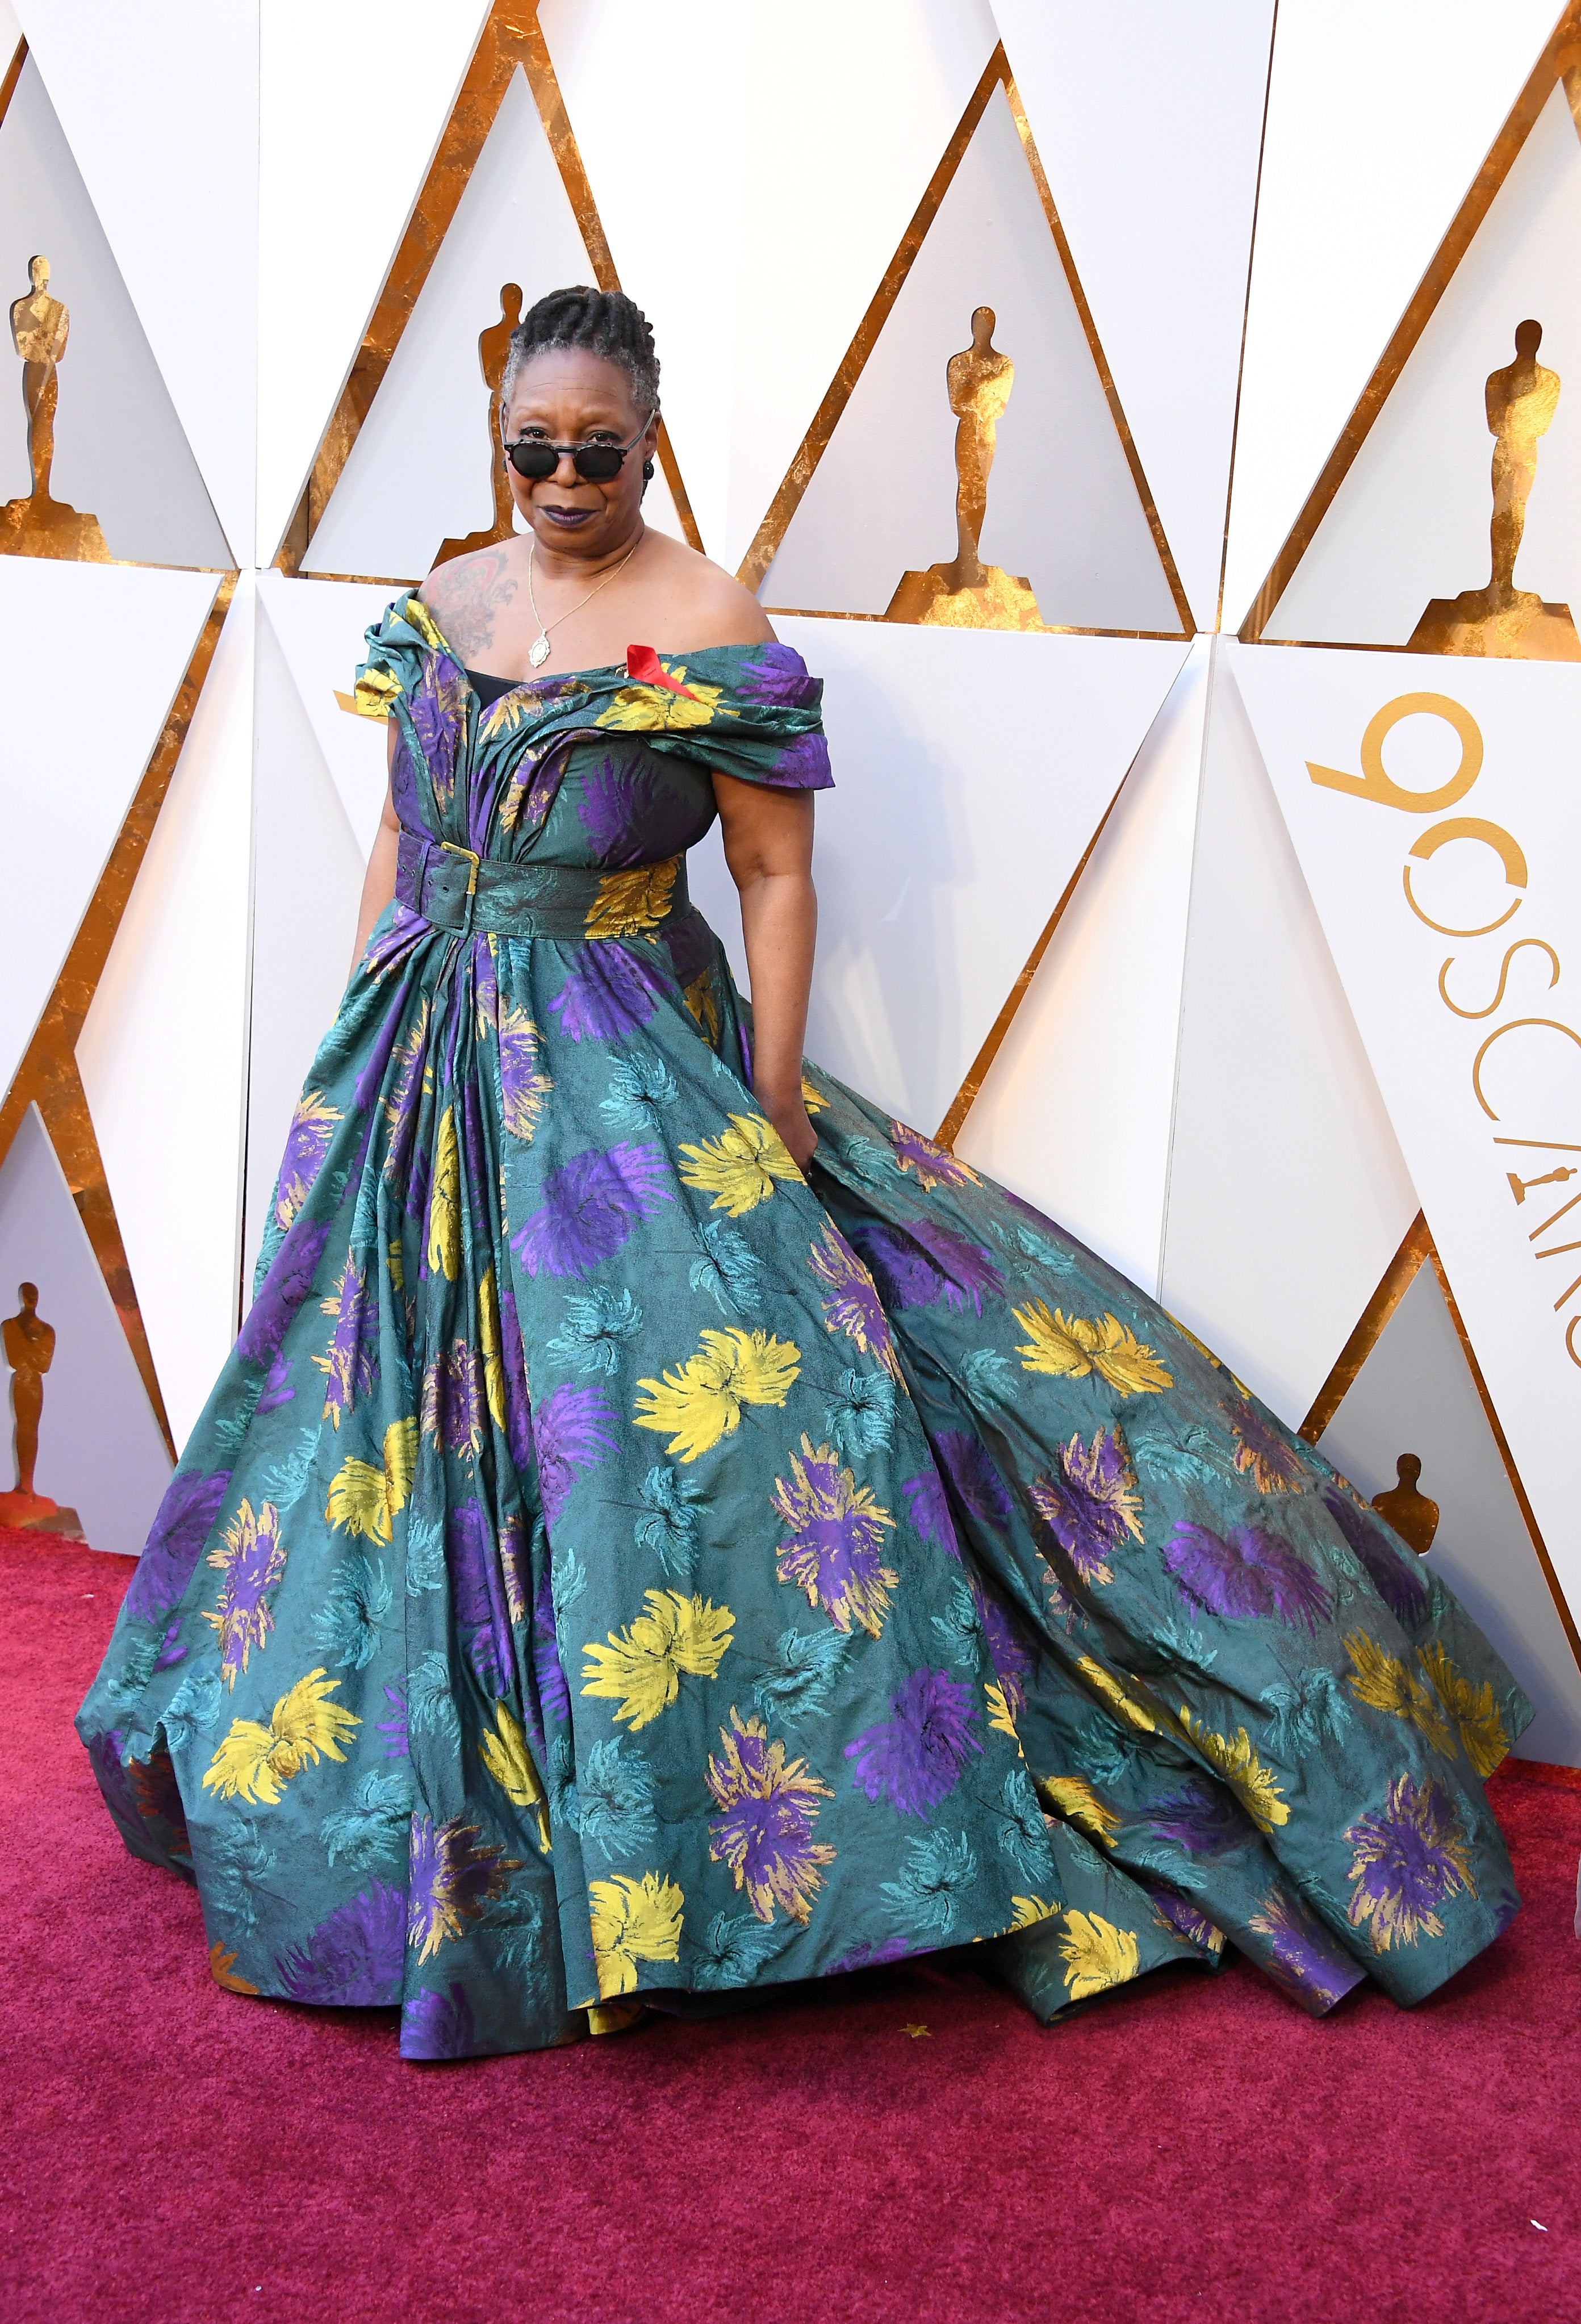 All The Red Carpet Looks From The 2018 Academy Awards